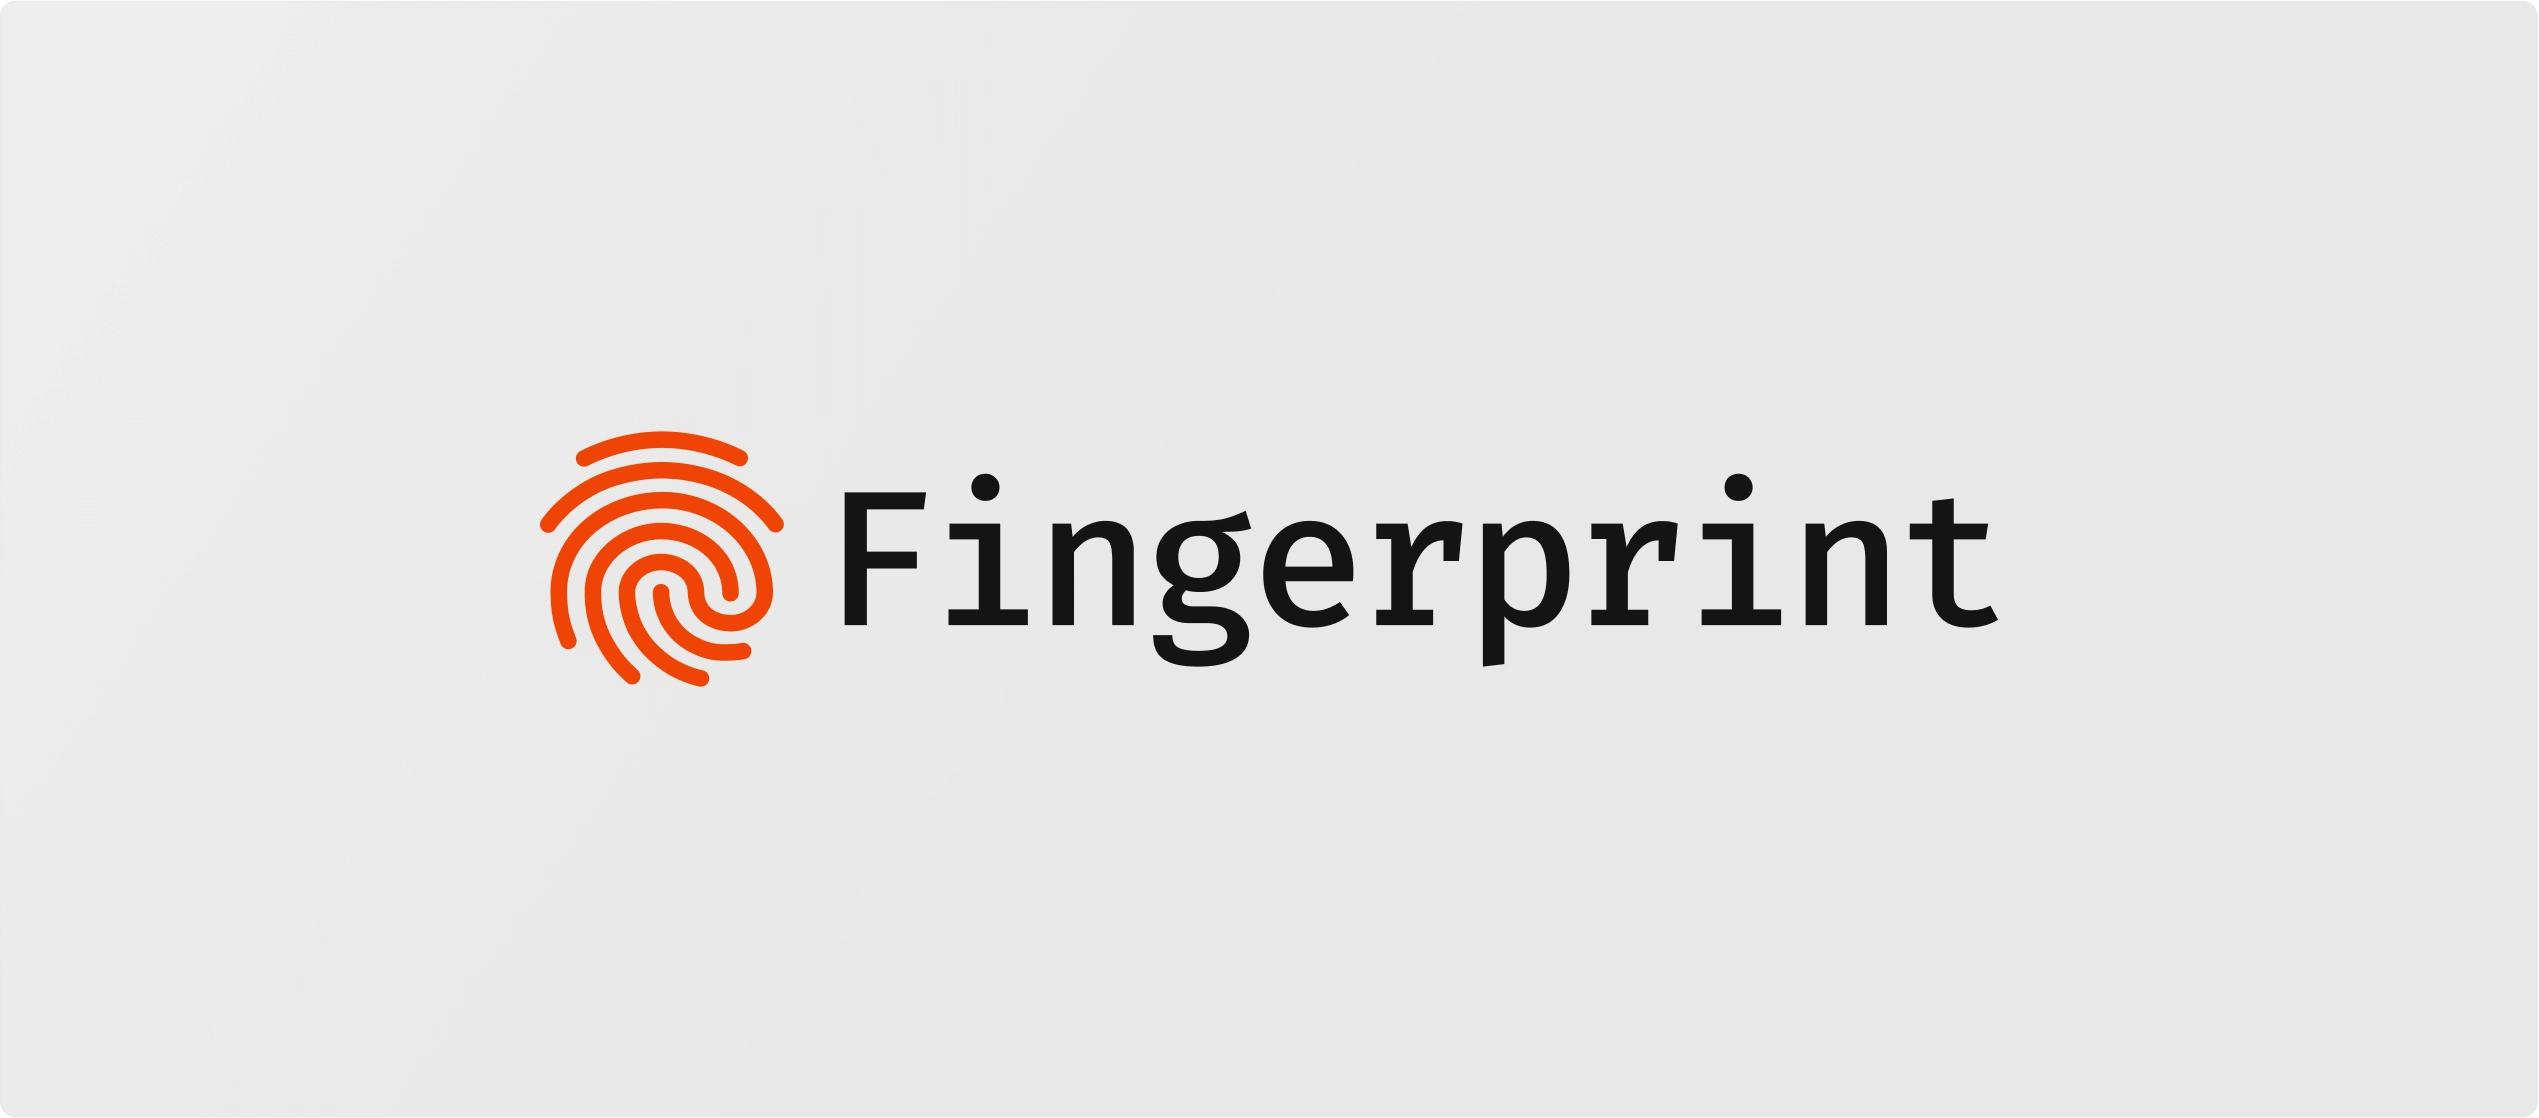 Open Graph image example by Fingerprint